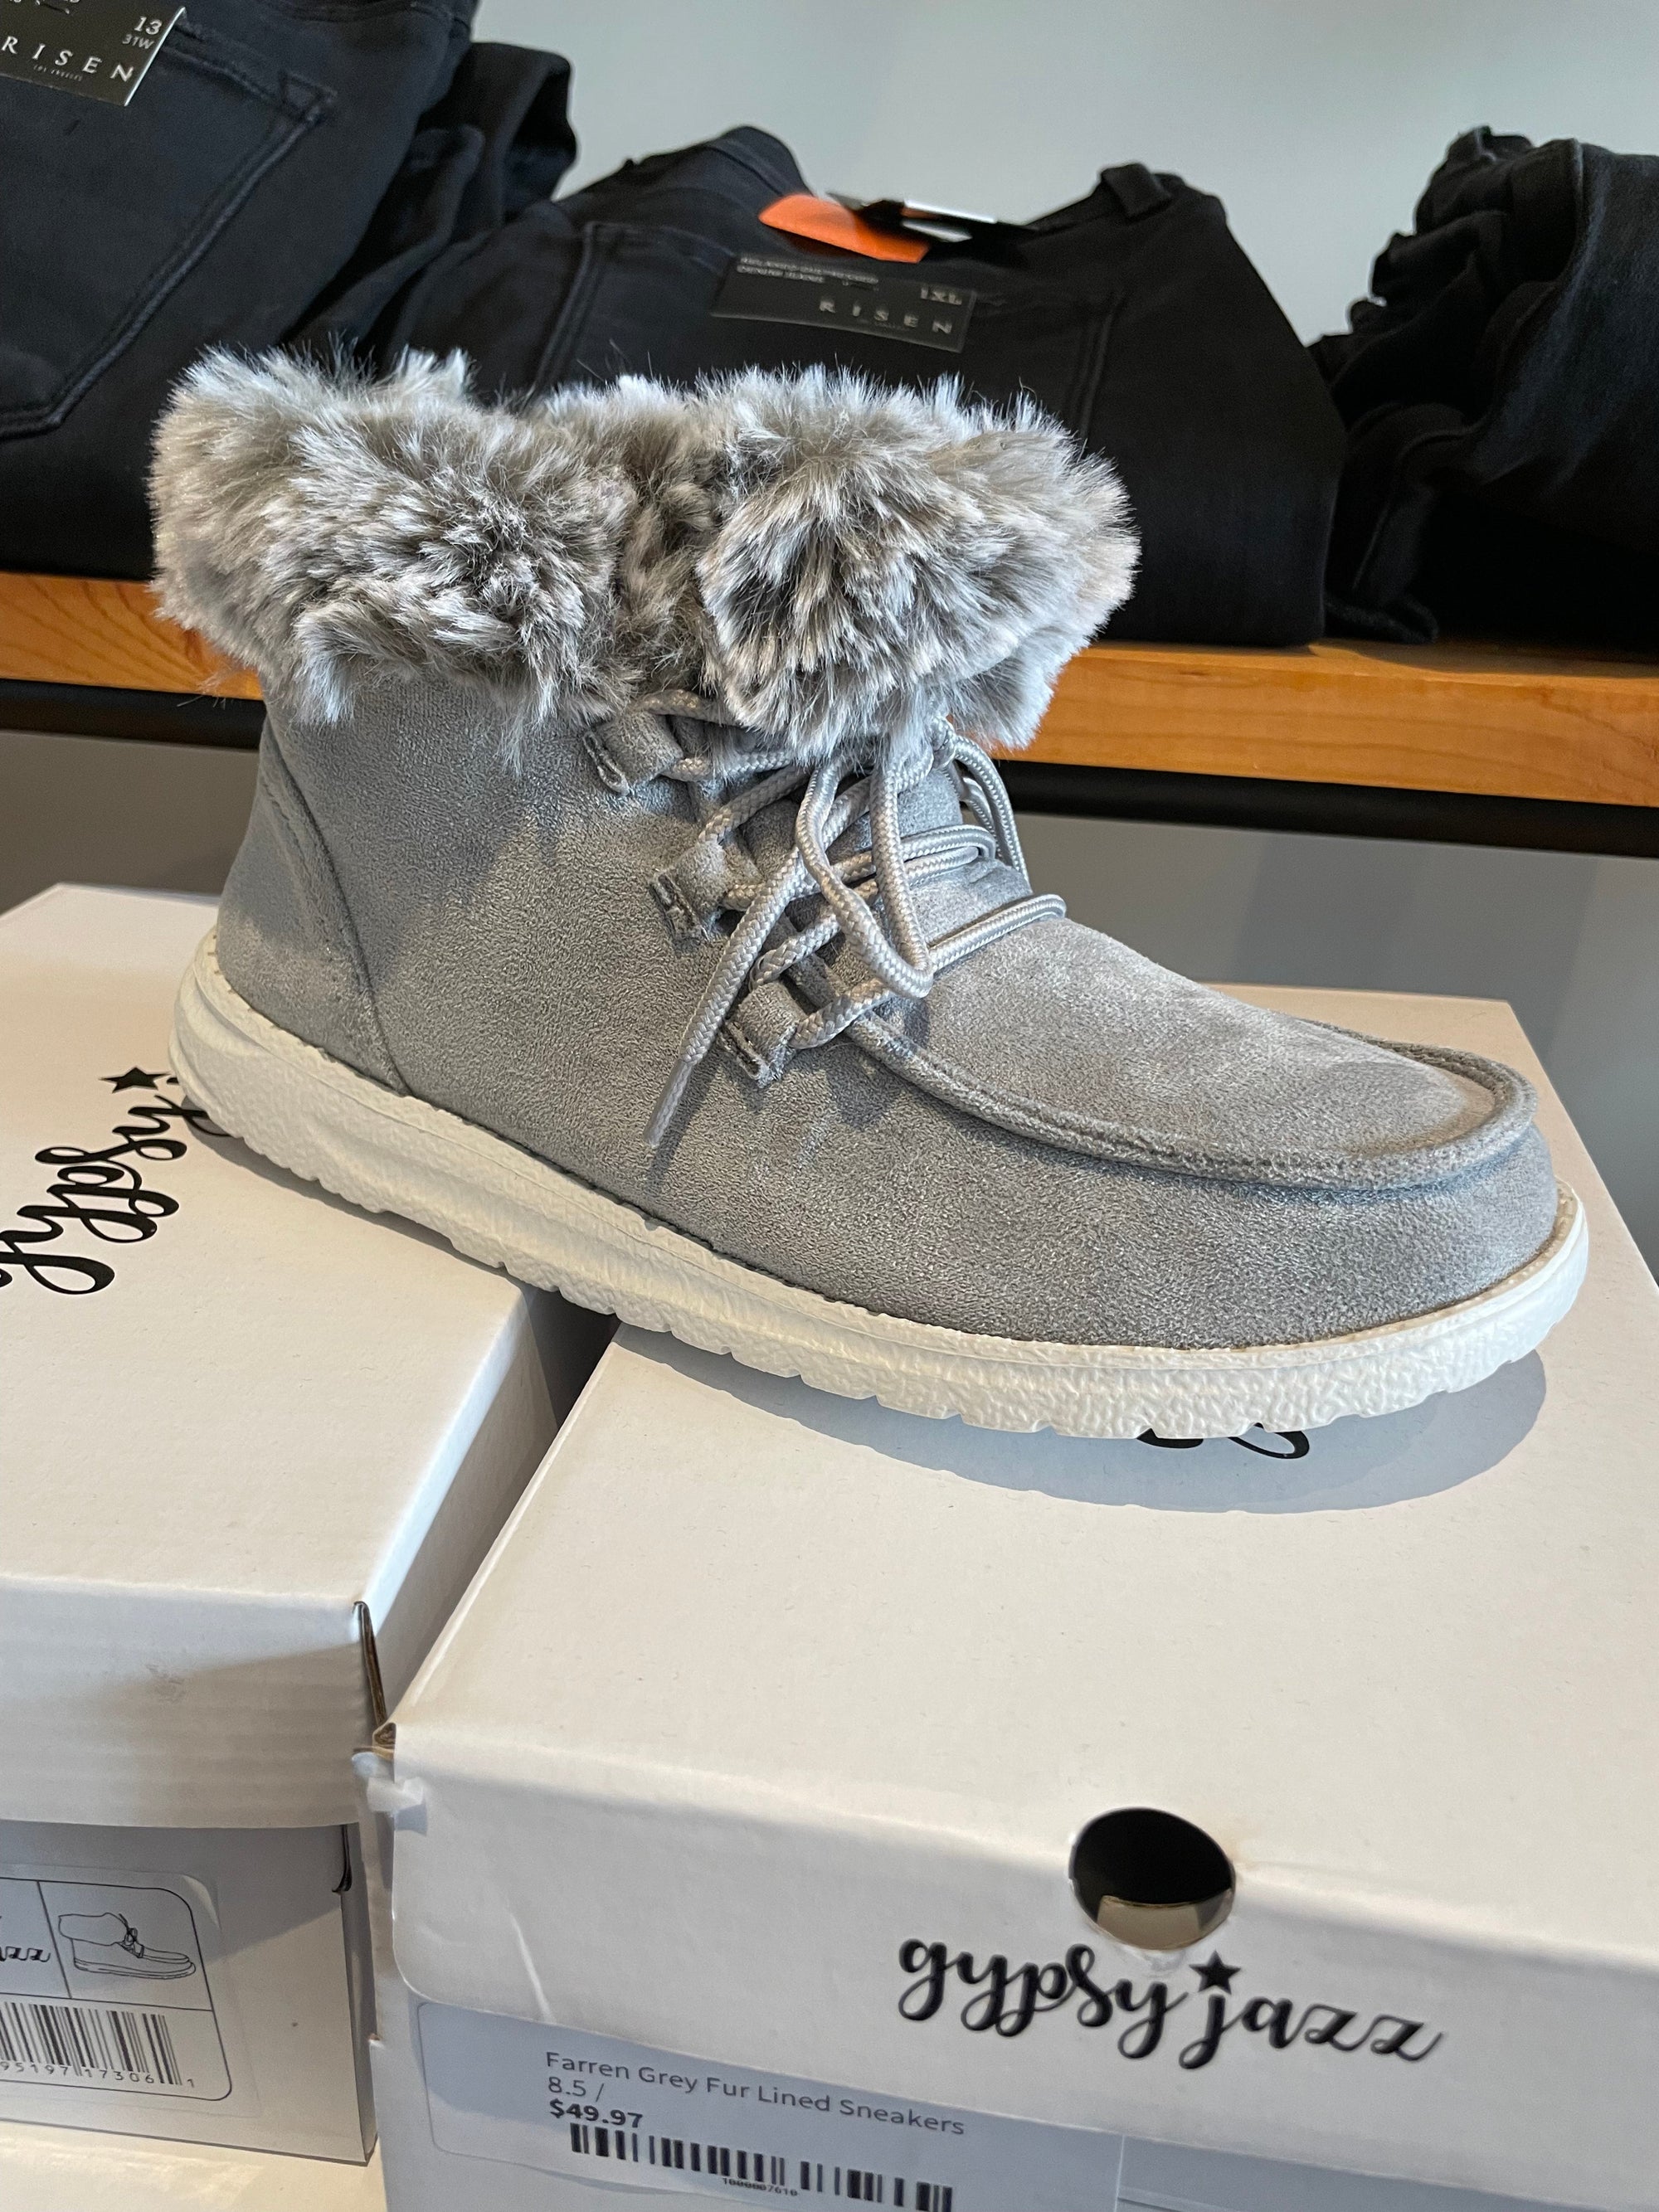 Farren Grey Fur Lined Sneakers Shoes Very G 